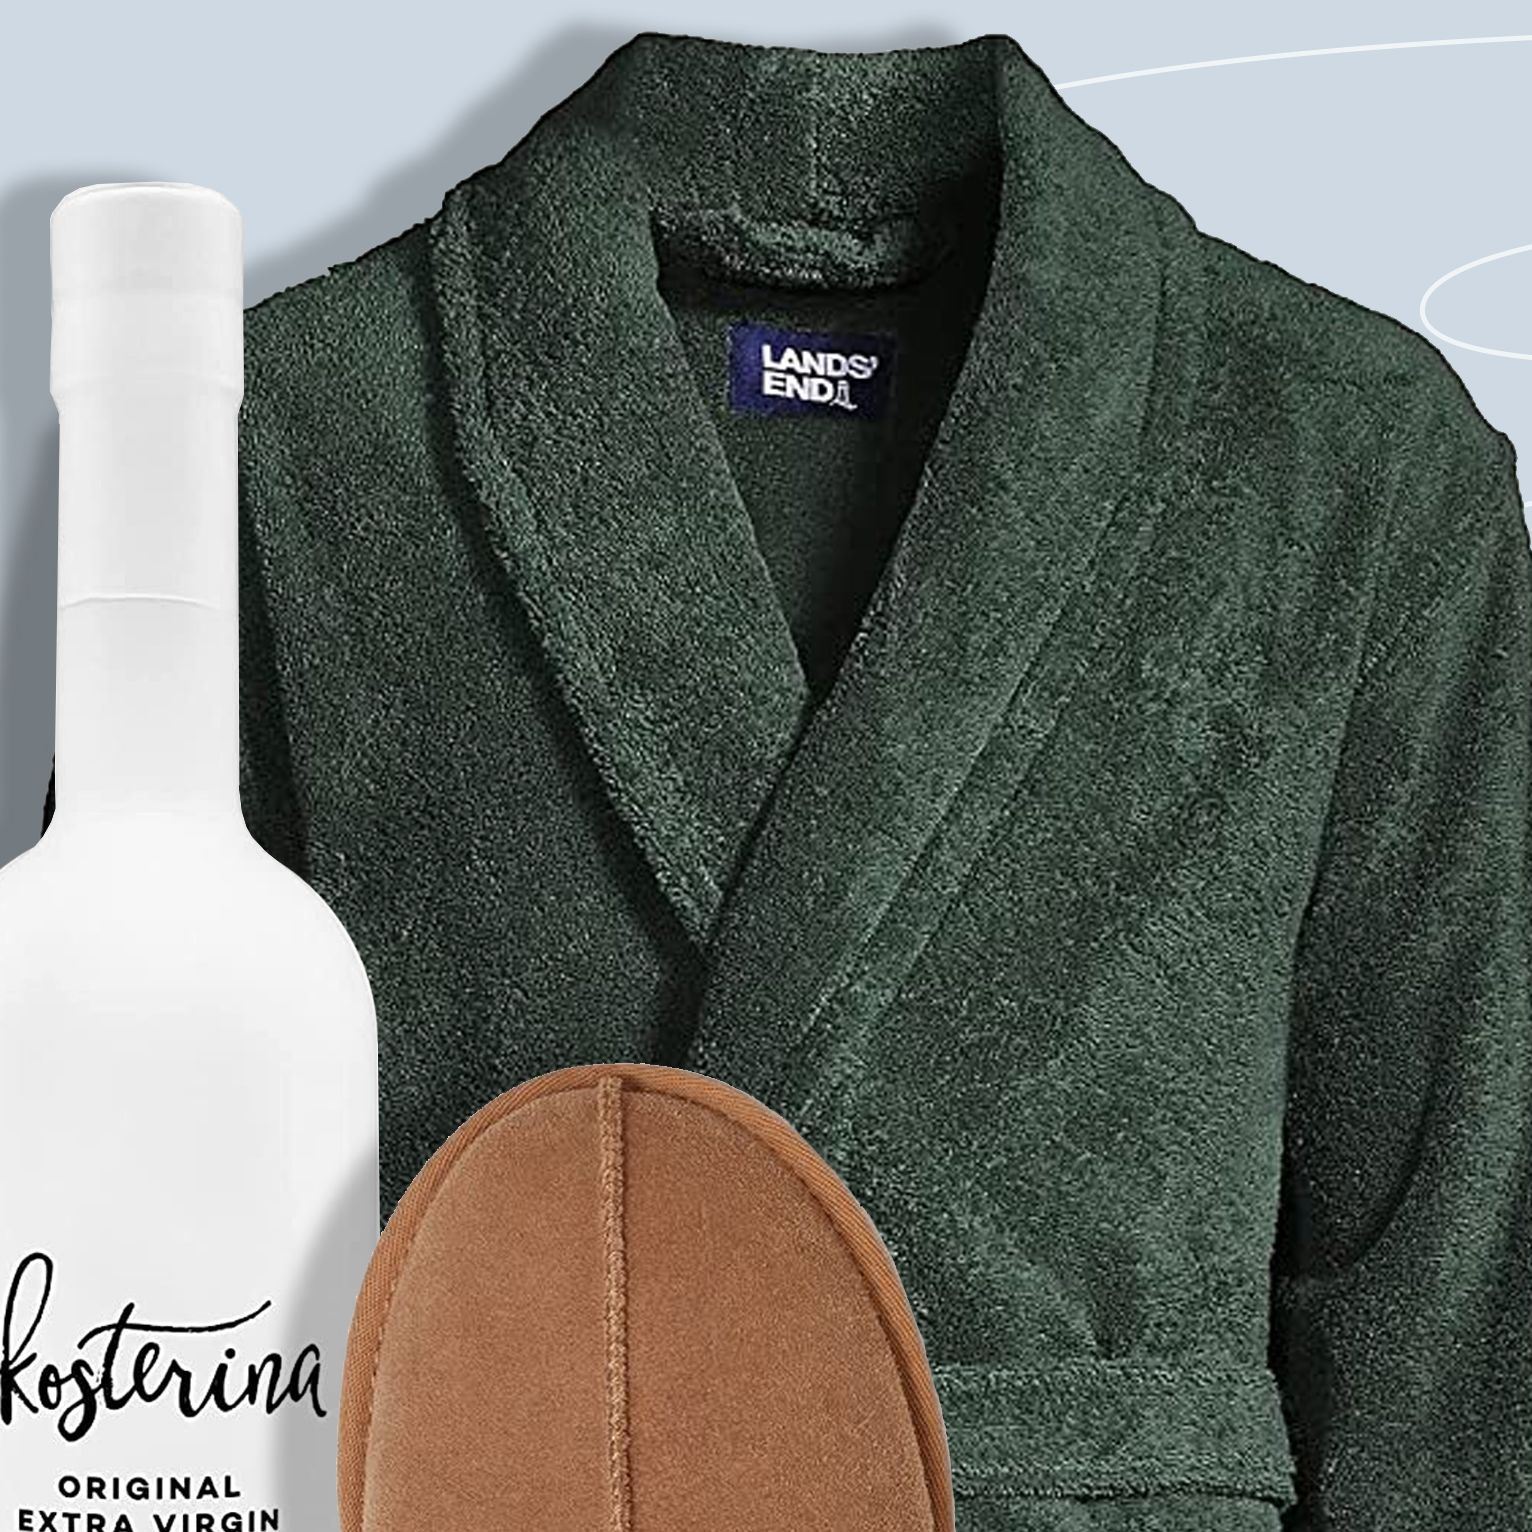 The 11 Best Valentine's Day Gifts on Amazon, According to Us at Esquire